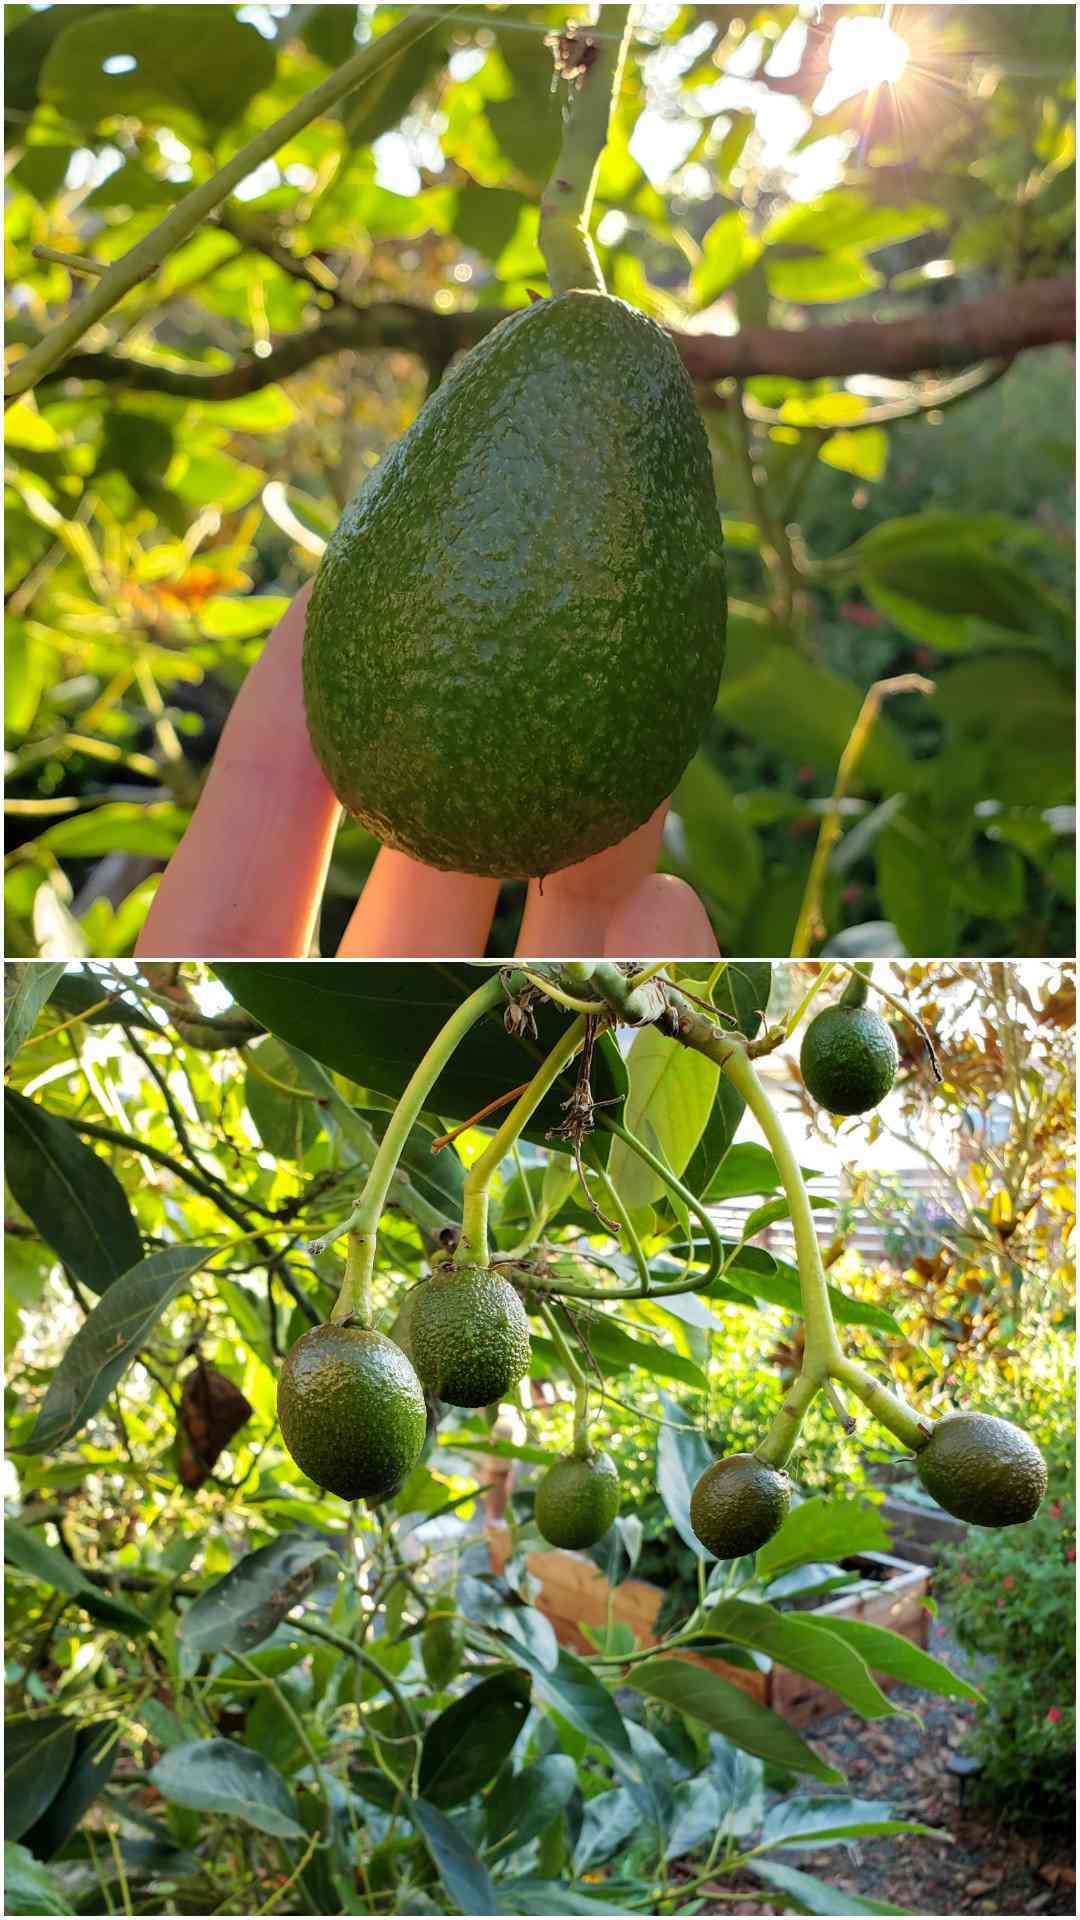 A two part image collage, the first image is a hand holding a smaller avocado hanging from a tree. The second image shows a number of smaller avocados growing amongst the understory of an avocado tree.